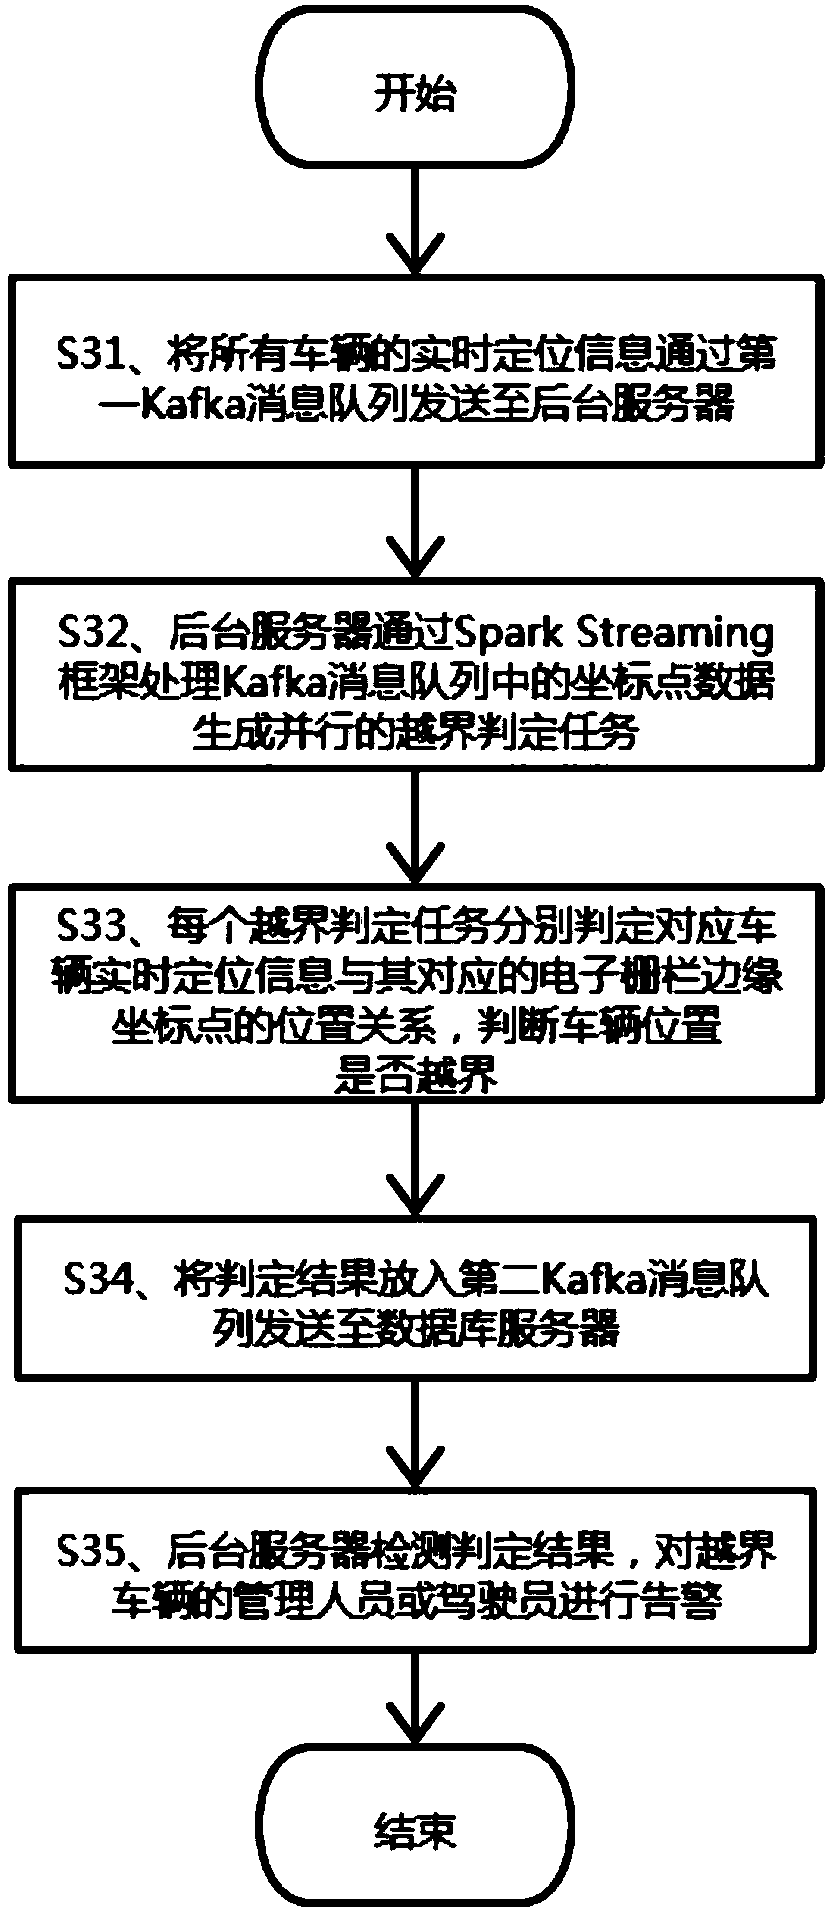 Vehicle boundary crossing recognition and alarm method and system based on electronic fence